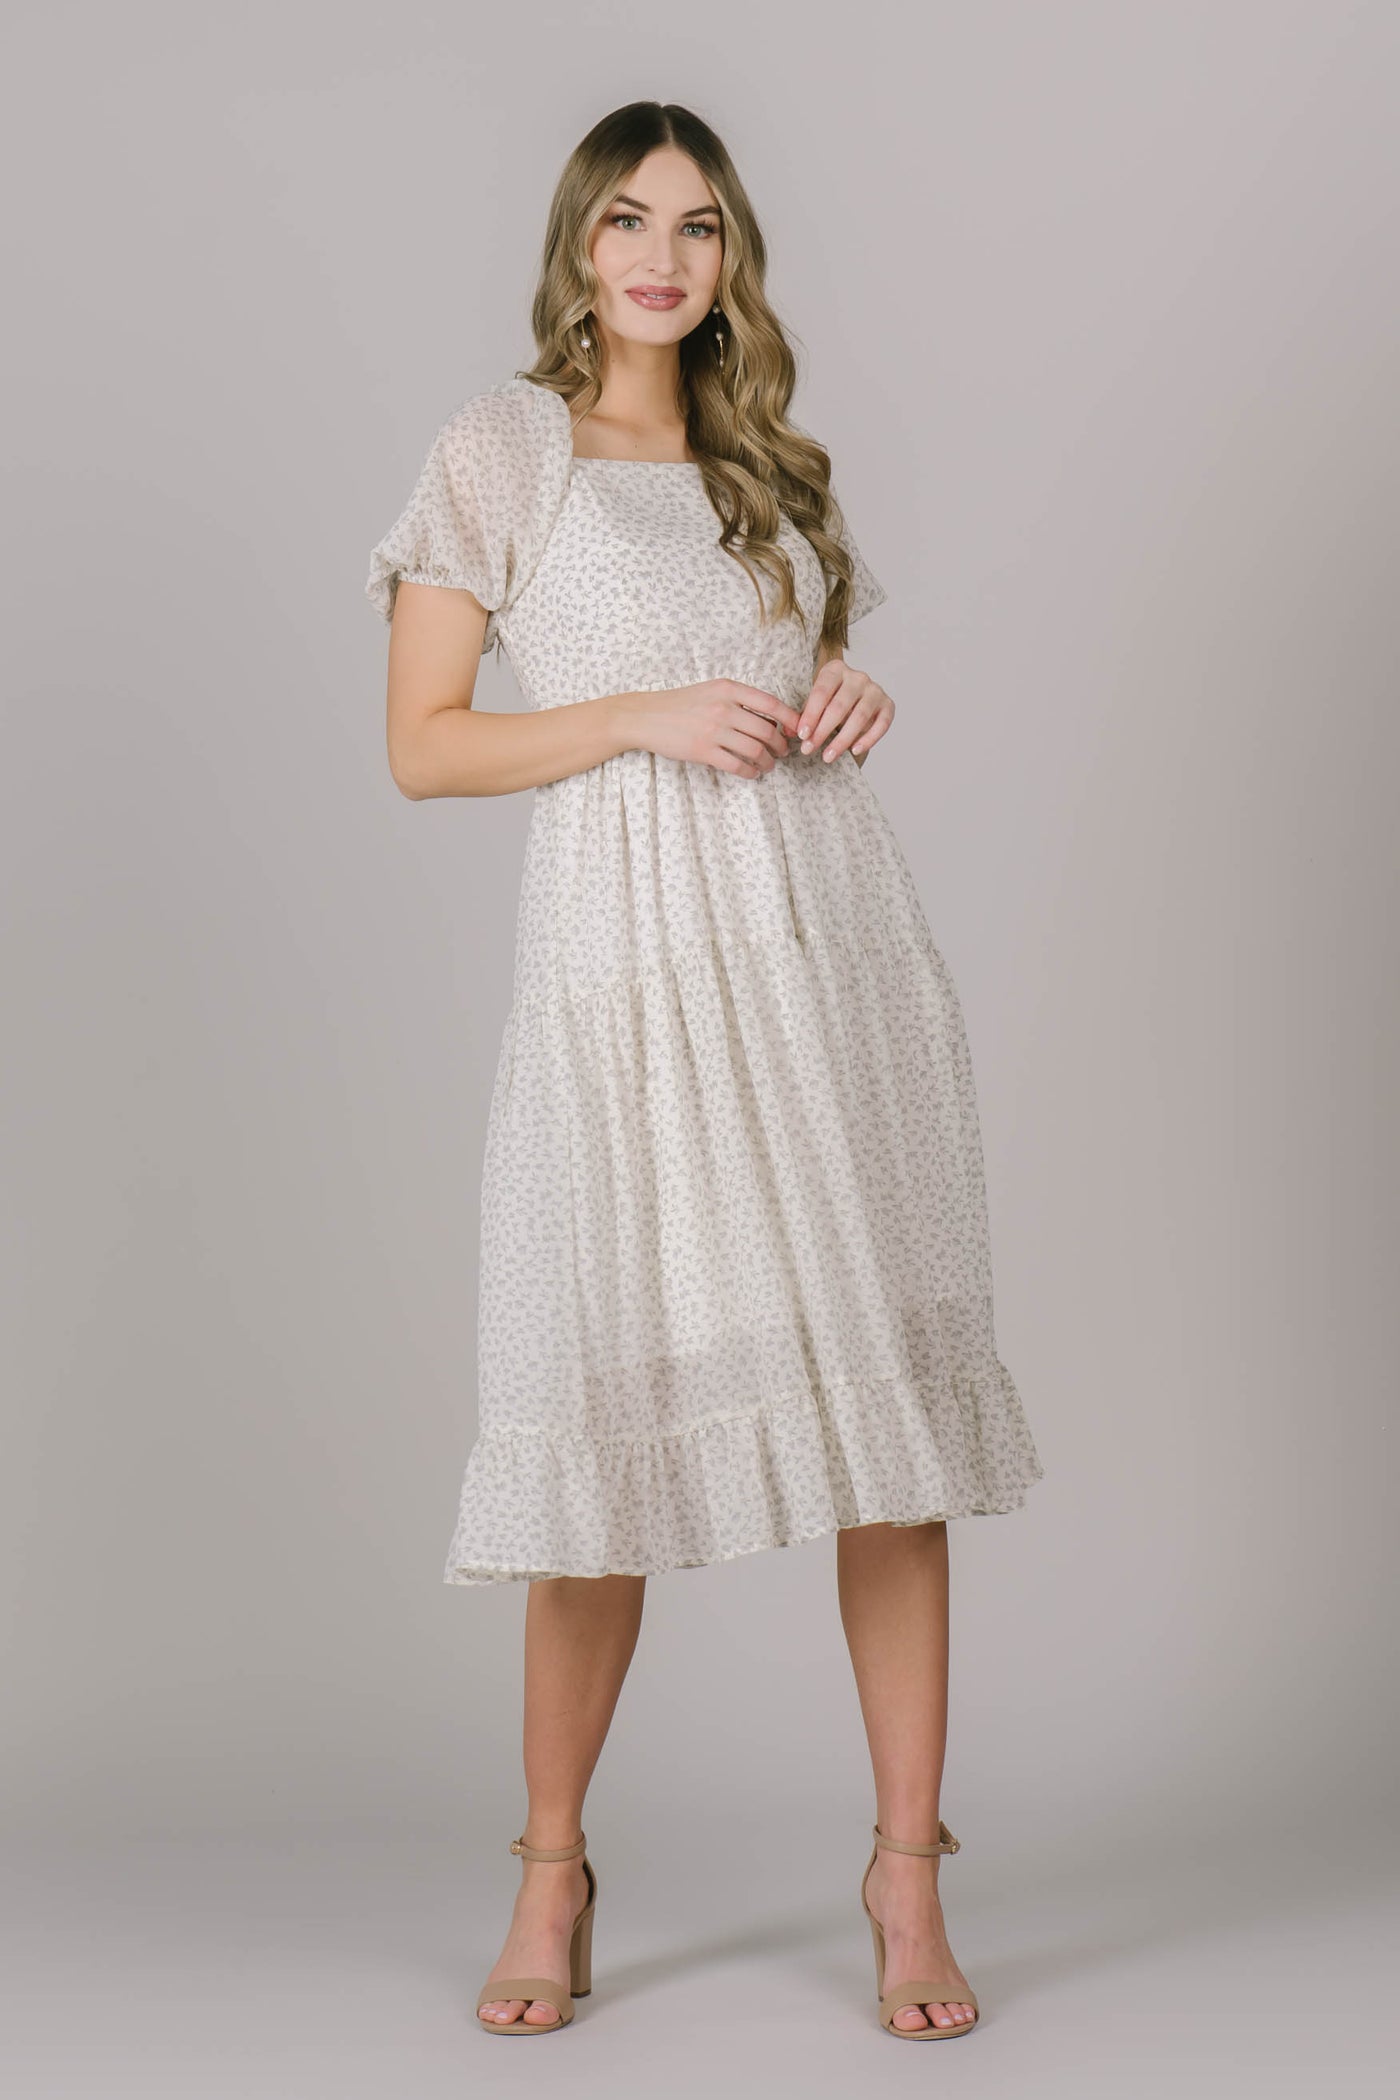 Modest dress in Utah with cute puff sleeves, the most flattering square neck, and a floral pattern throughout the dress.